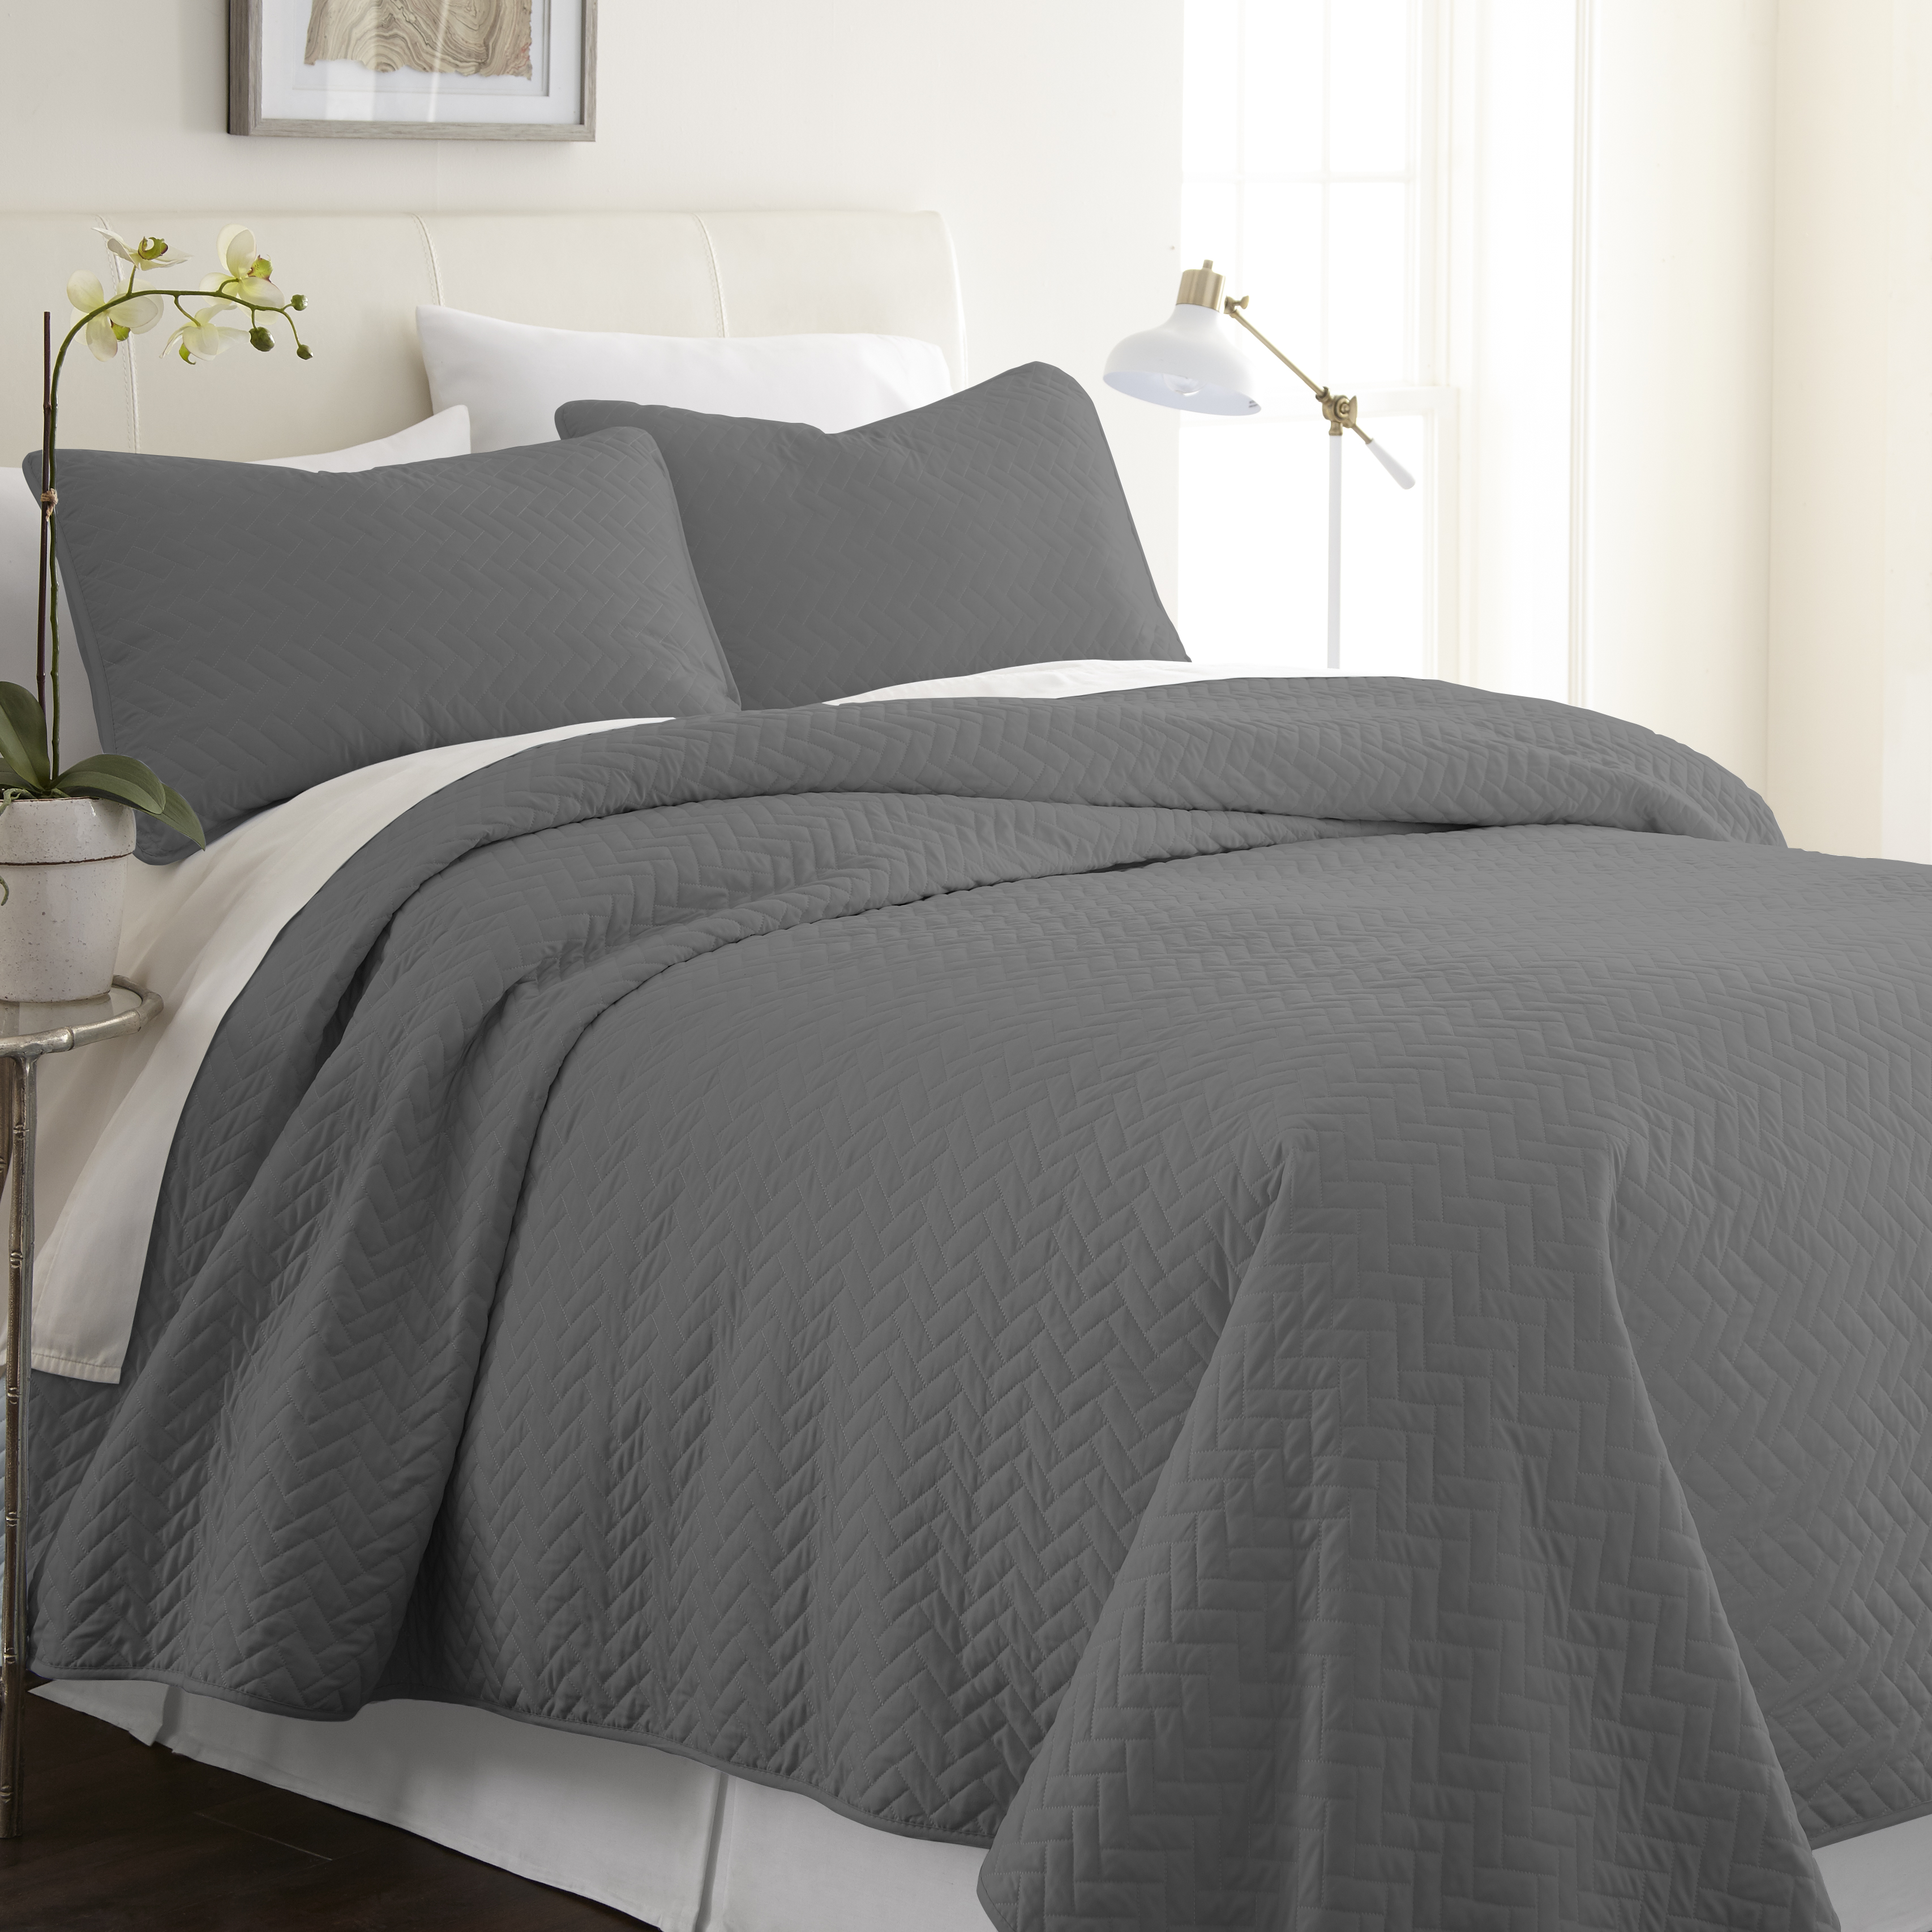 ienjoy Home Premium Ultra Soft Herring Pattern Quilted Coverlet Set